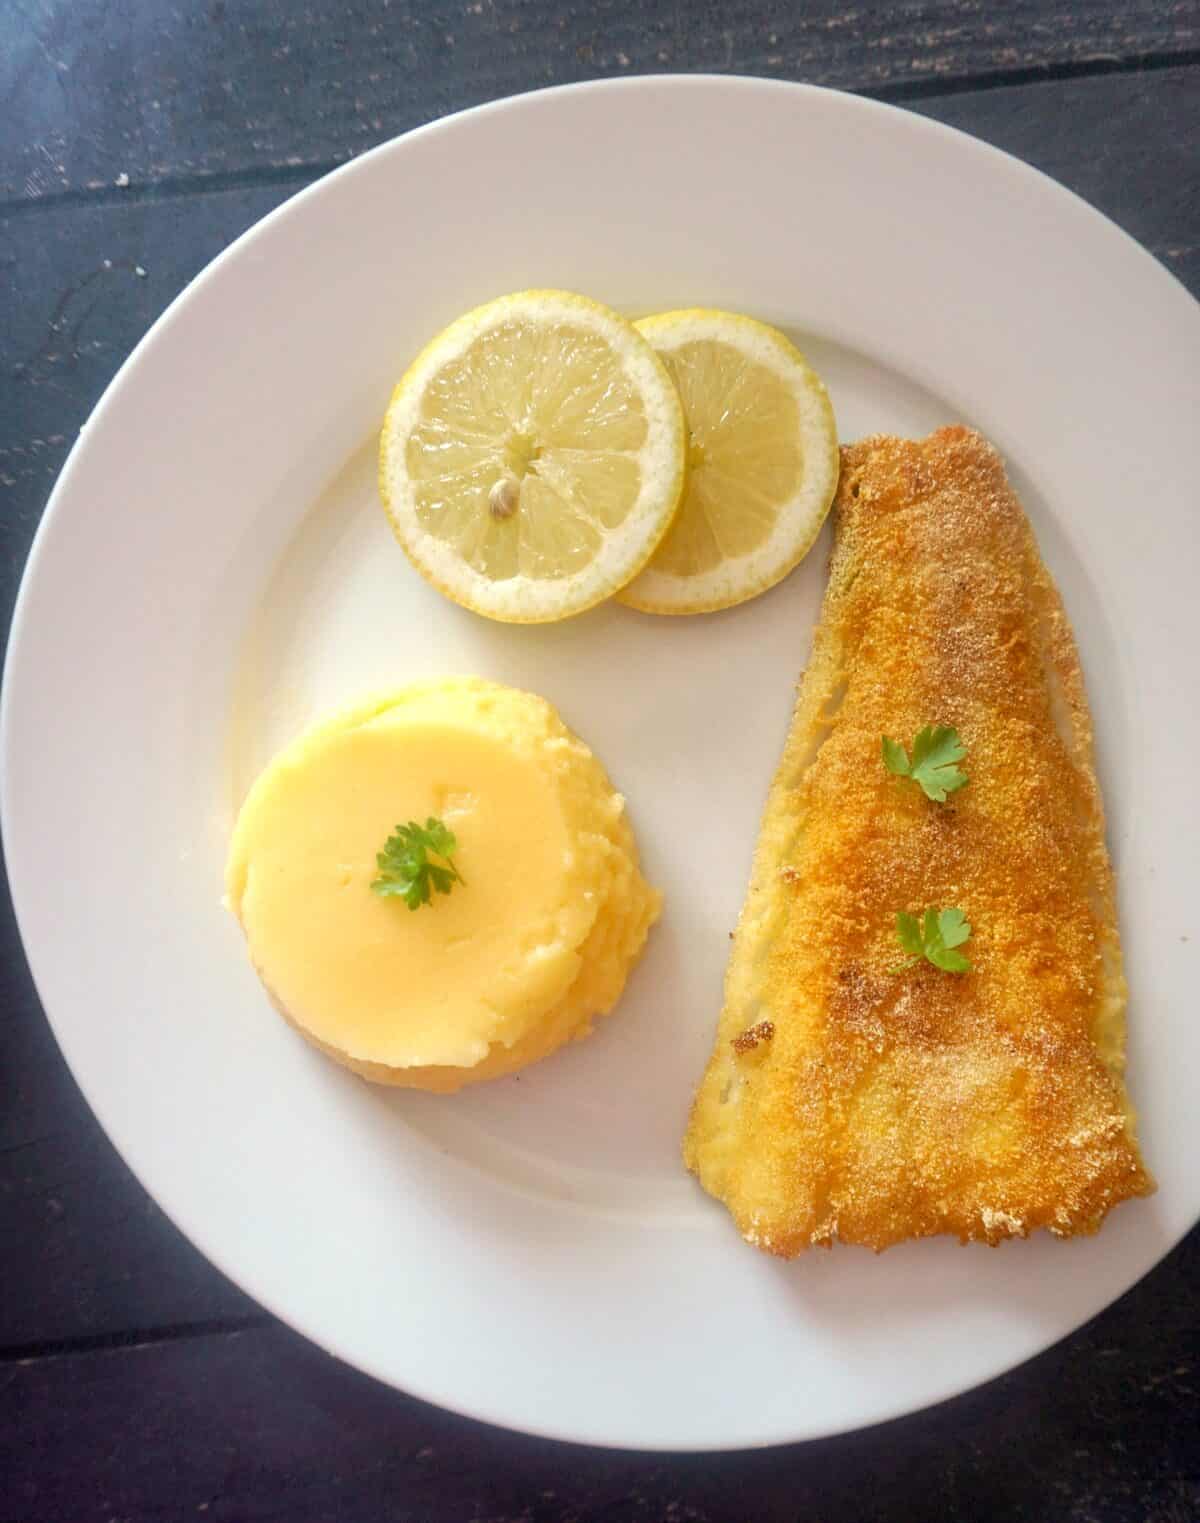 A white plate with a fried fish fillet, 2 slices of lemon and polenta.